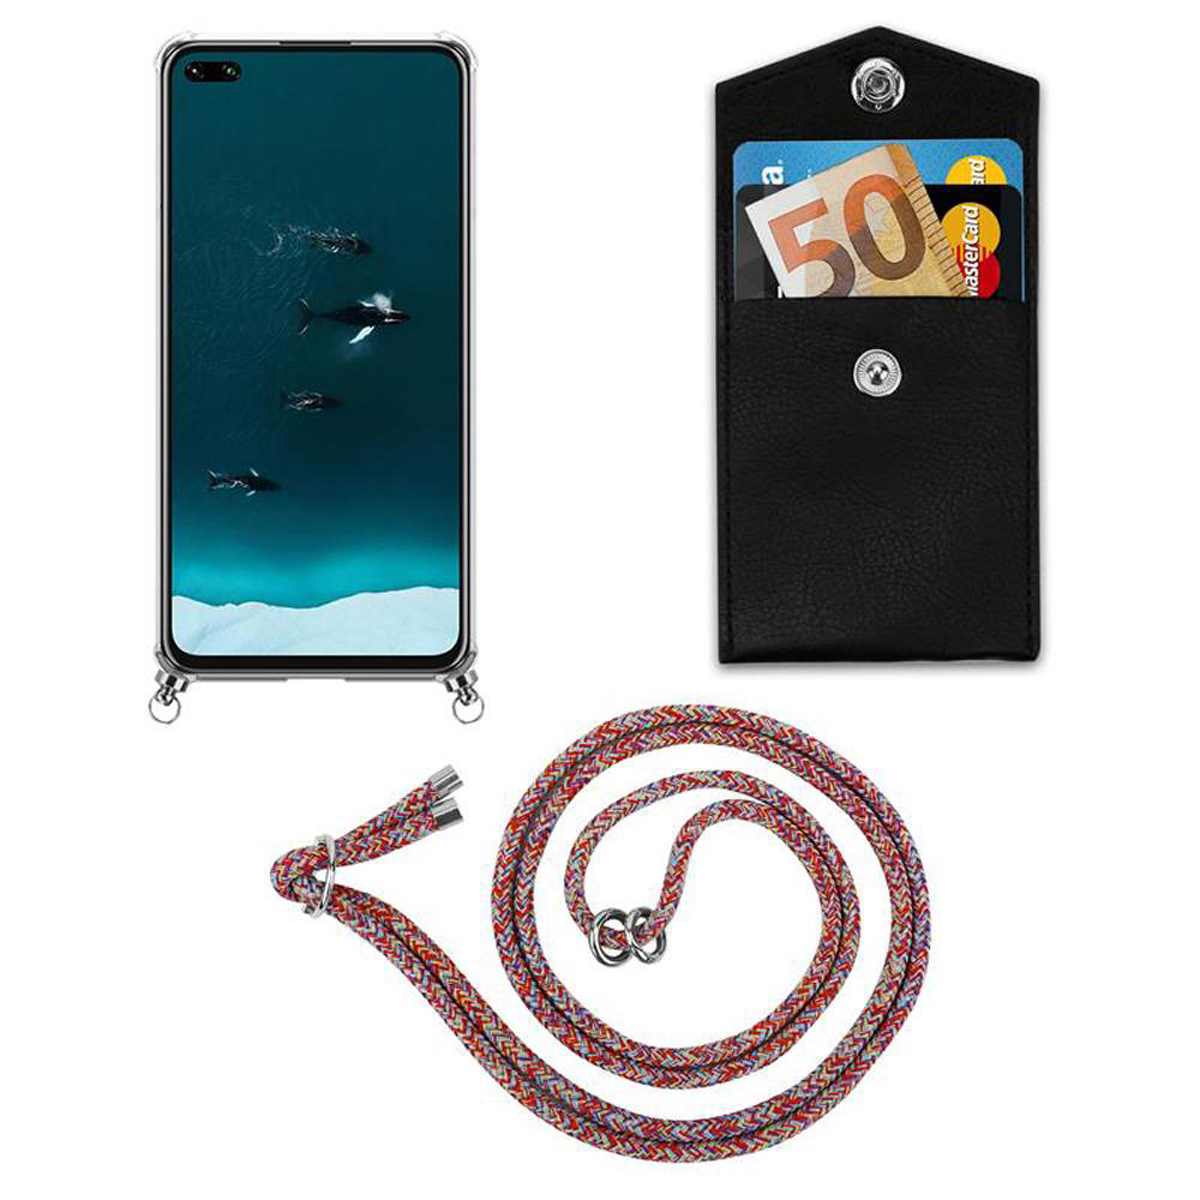 und Band Ringen, Kette CADORABO COLORFUL abnehmbarer Hülle, Honor, Kordel Silber Backcover, mit Handy 30, PARROT View